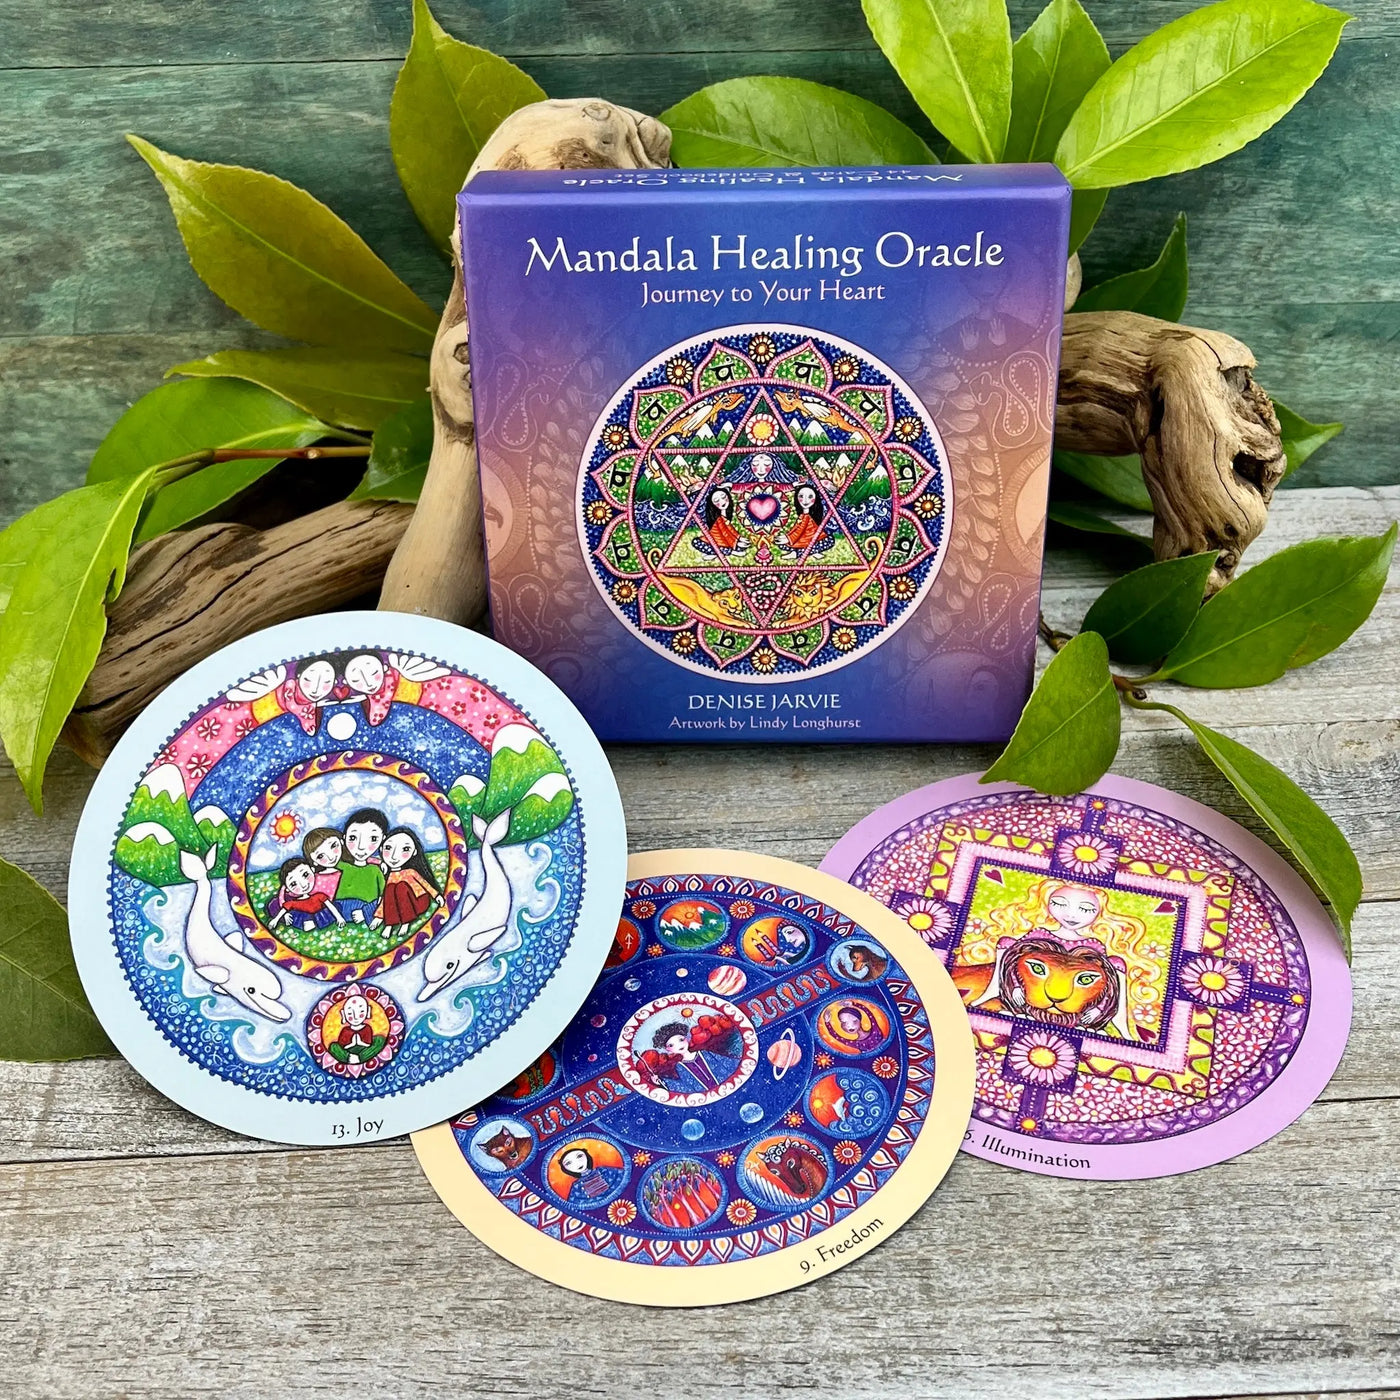 Mandala Healing Oracle: Journey to Your Heart